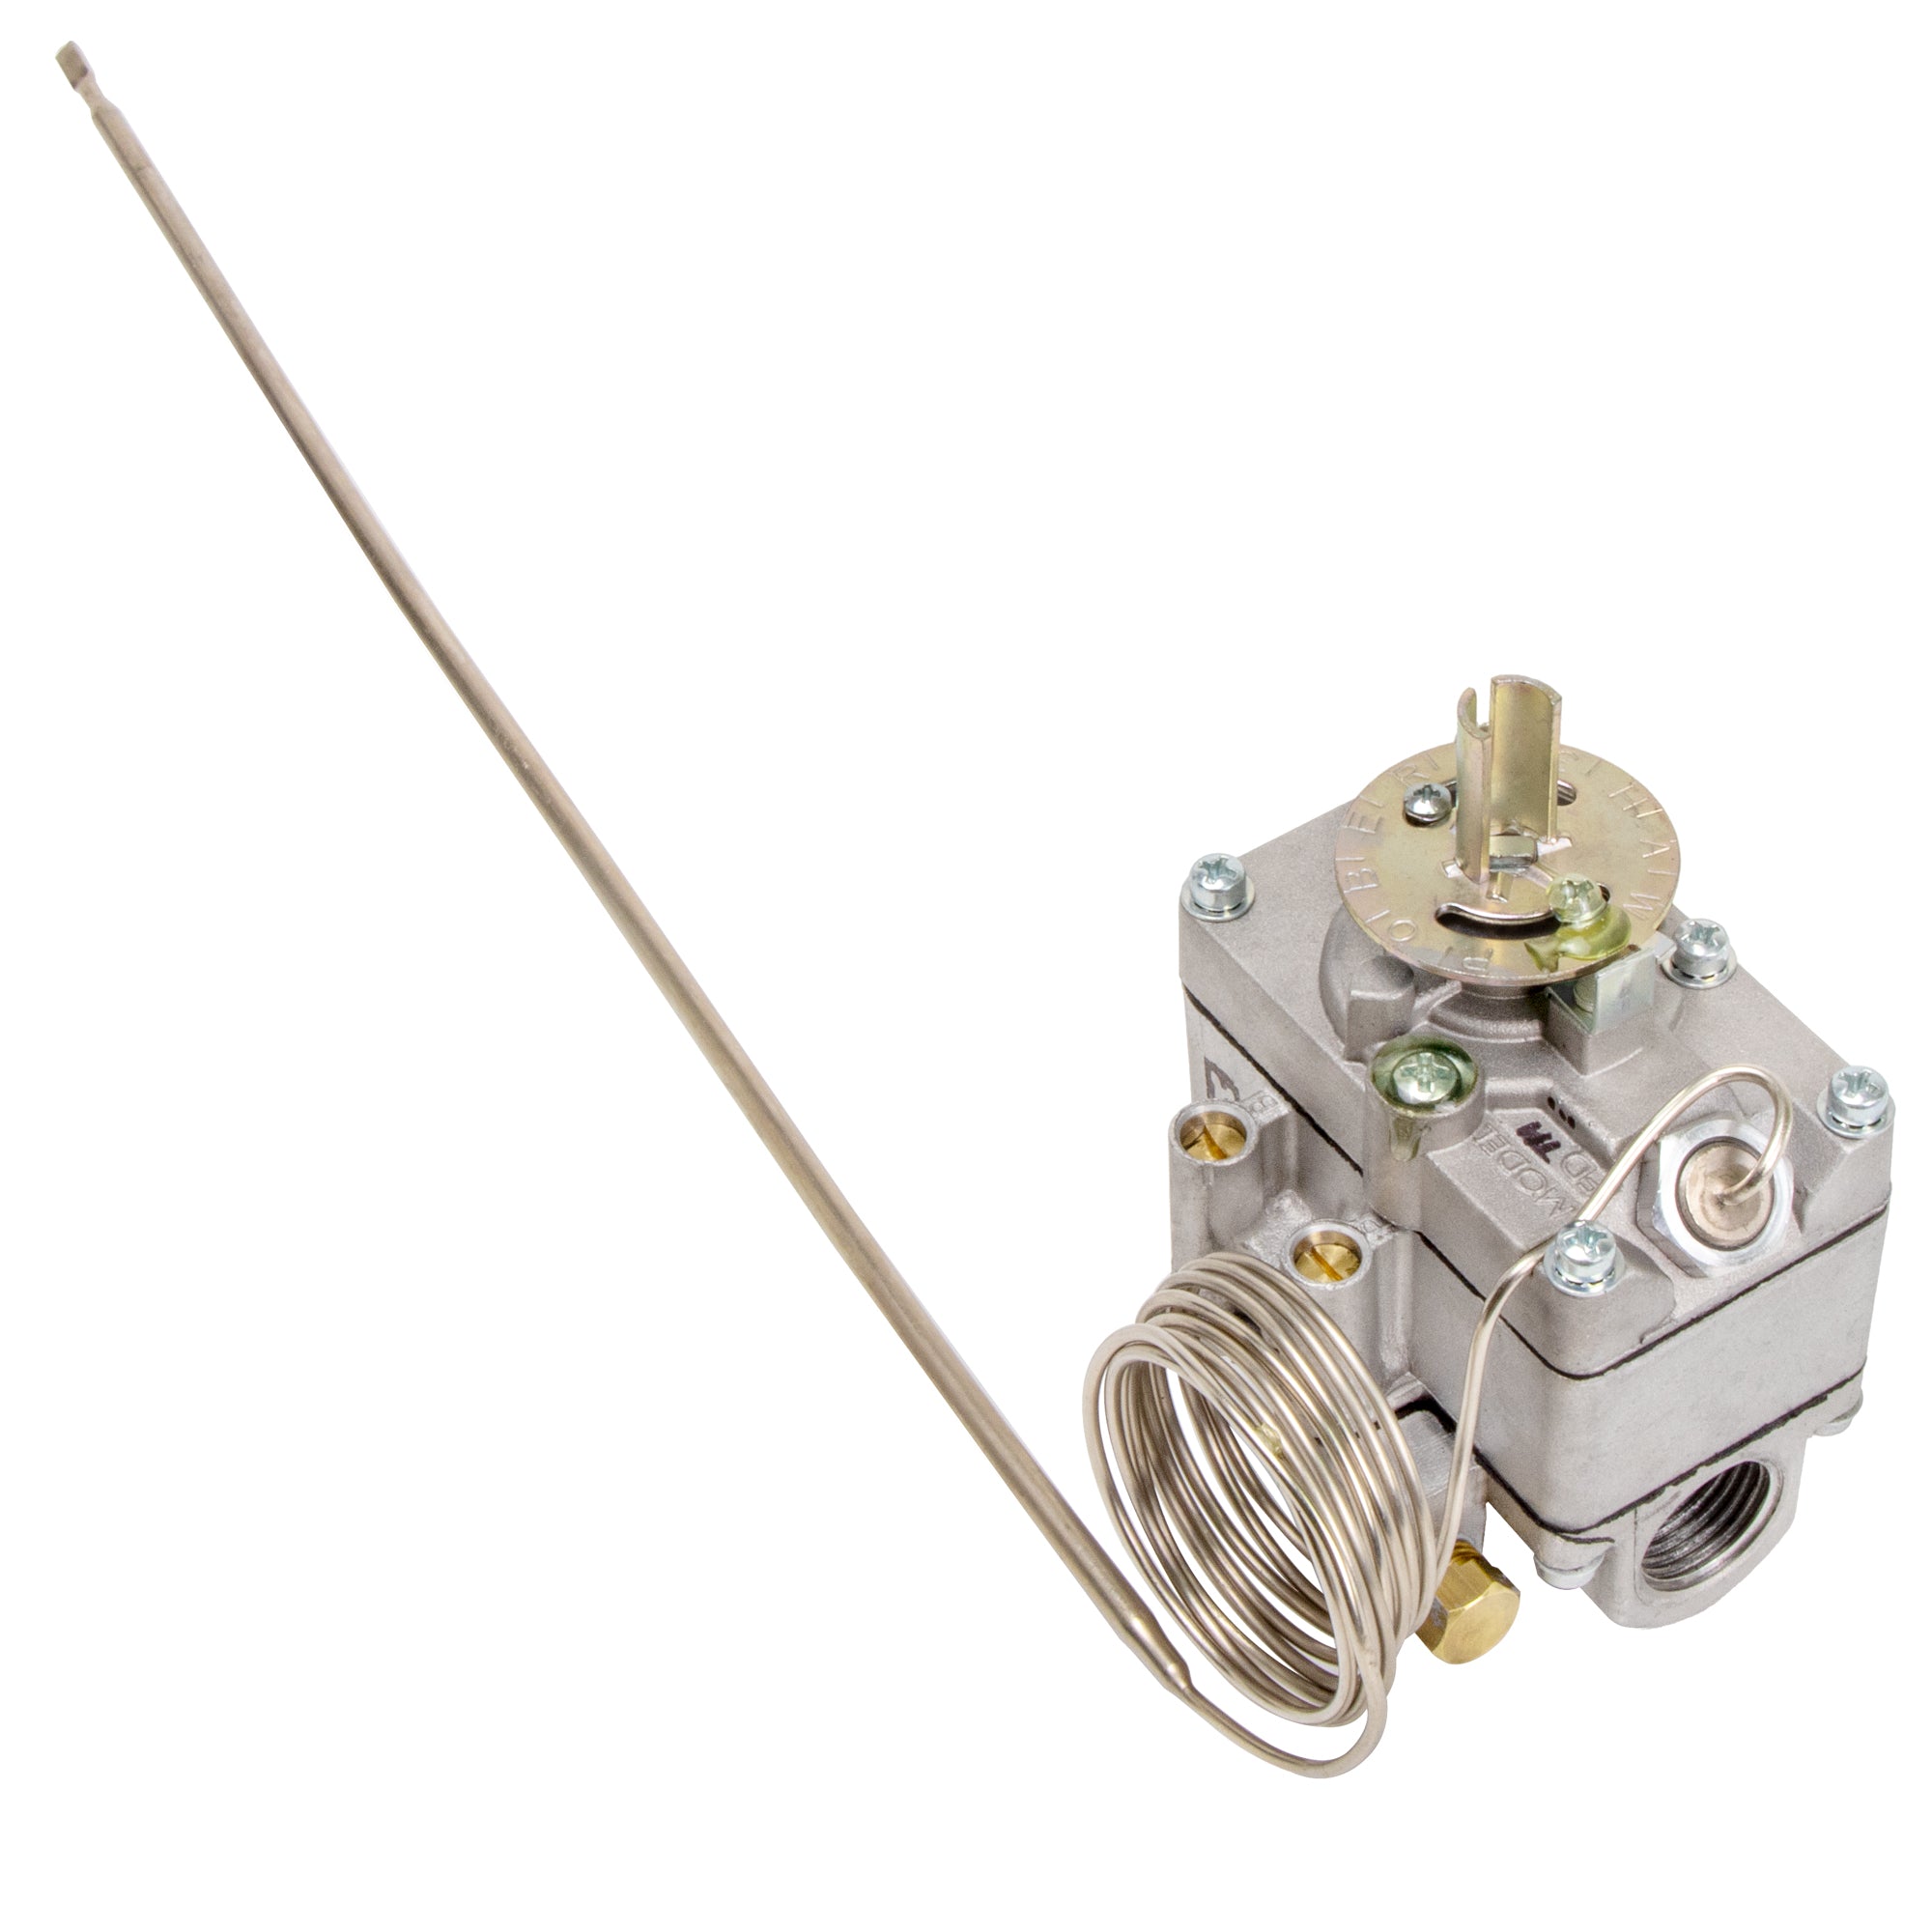 Robertshaw KKTB-18-48 Stove Oven Range Thermostat 5A 120VAC Max Temp 599°F for Awoco and Other GAS Range Stoves